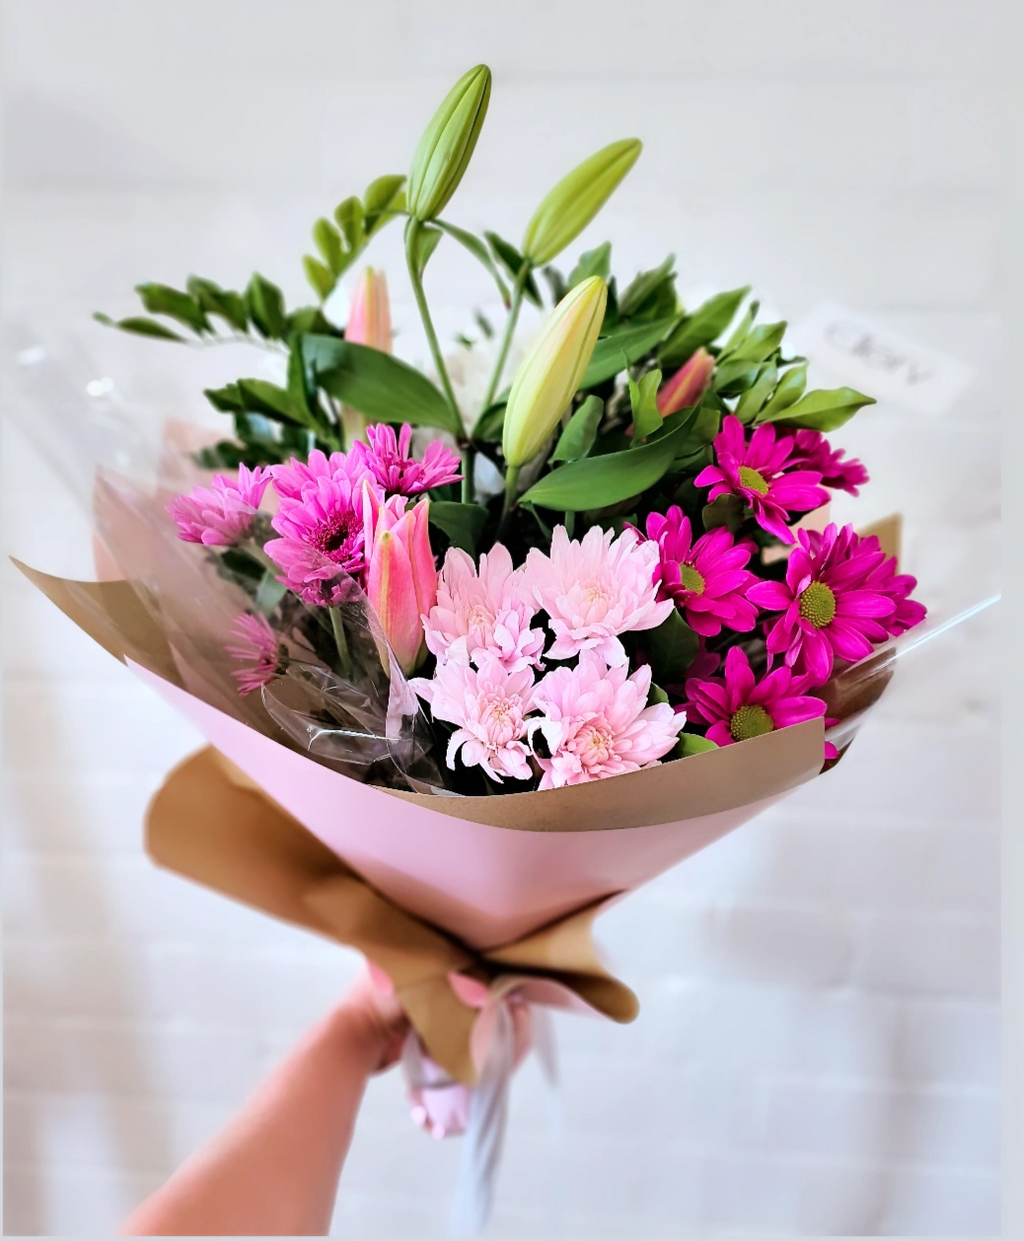 **MOTHER'S DAY BOUQUET PRE ORDER**